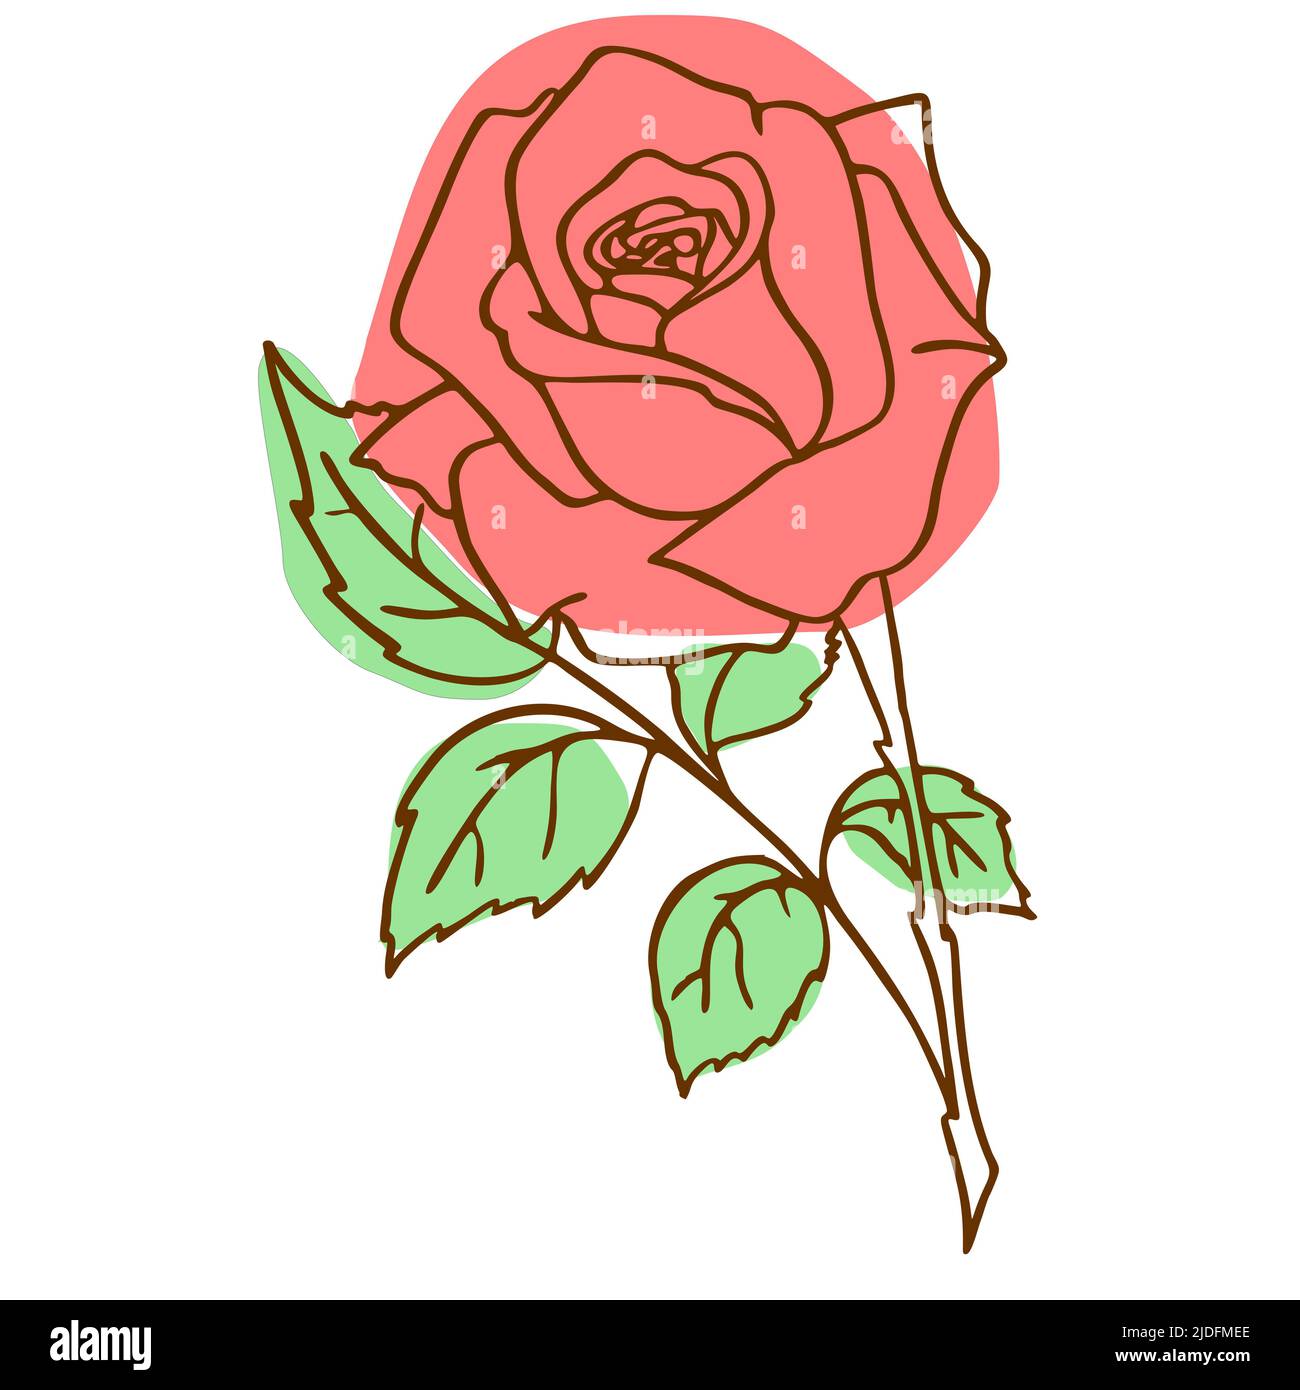 Rose tattoo closeup Cut Out Stock Images & Pictures - Alamy